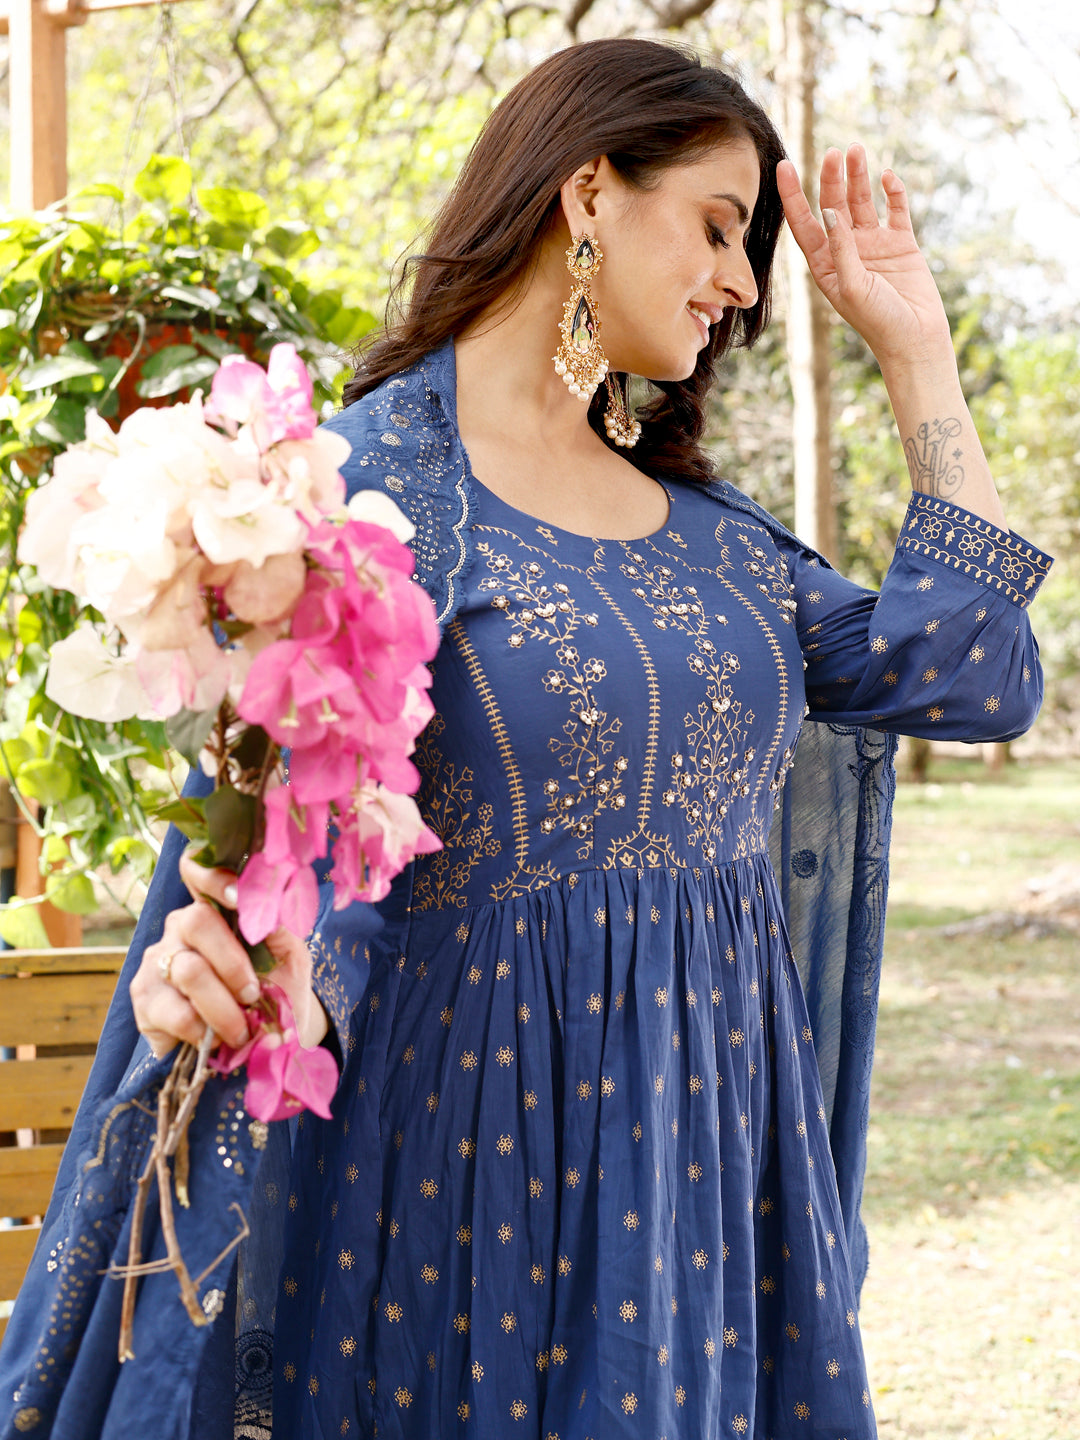 The Stunning Special Designed Long Kurta With Dupatta Suit